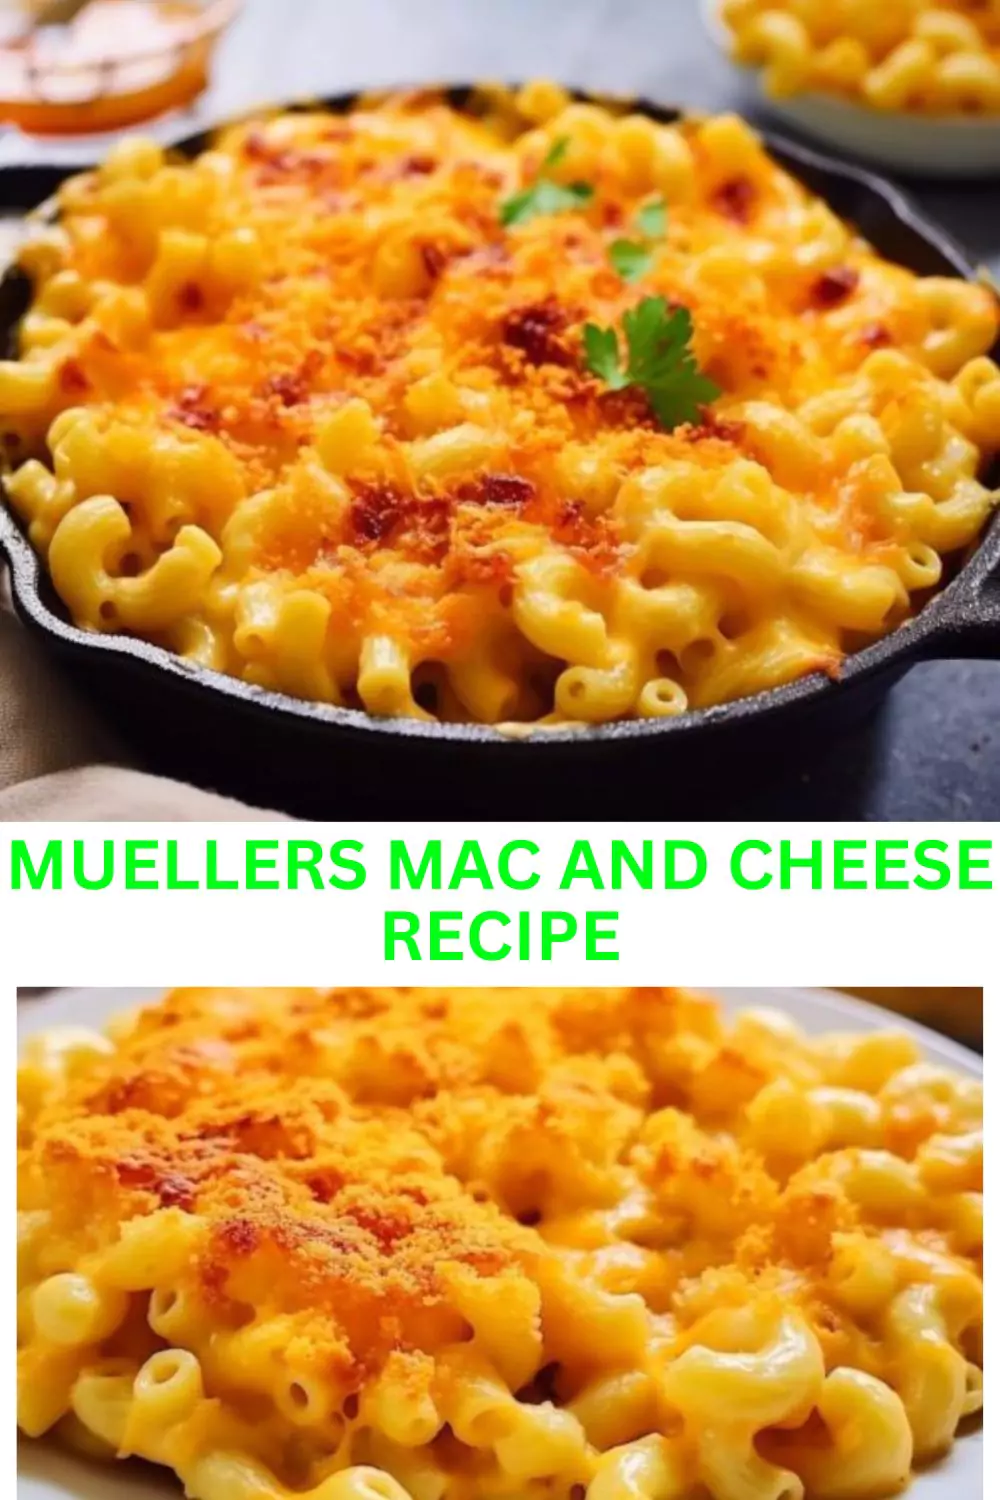 Best Muellers Mac And Cheese Recipe